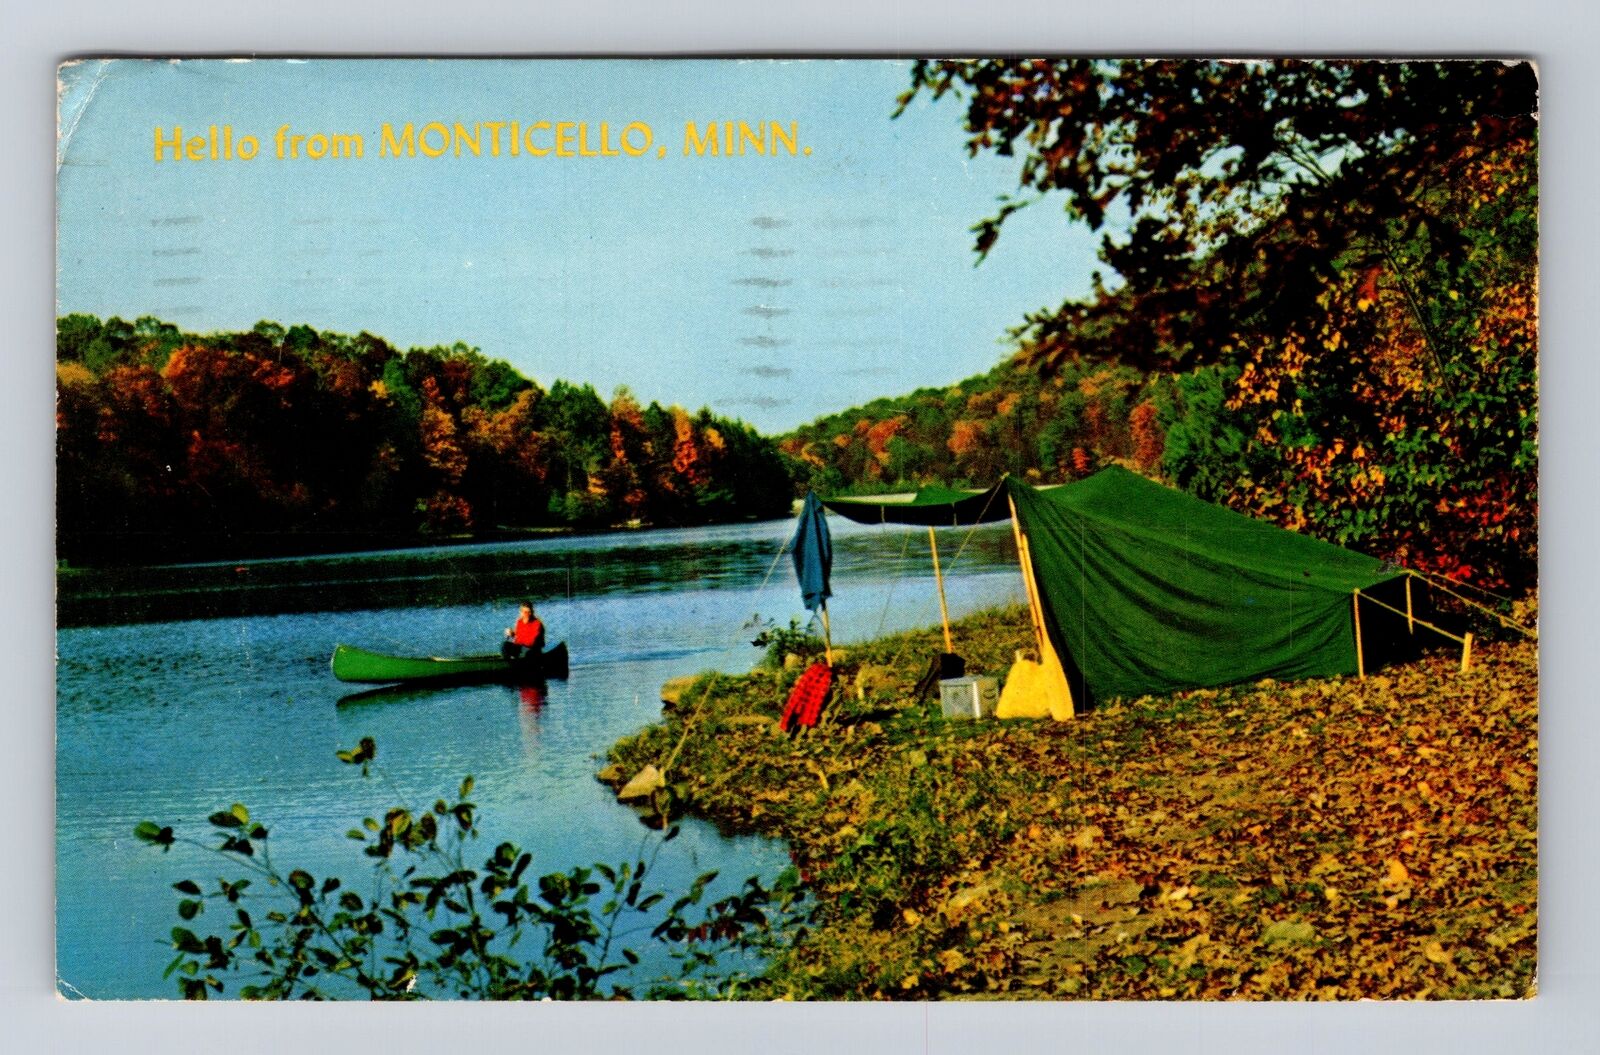 Monticello MN-Minnesota, General Greetings Camping Area, Vintage c1910 Postcard